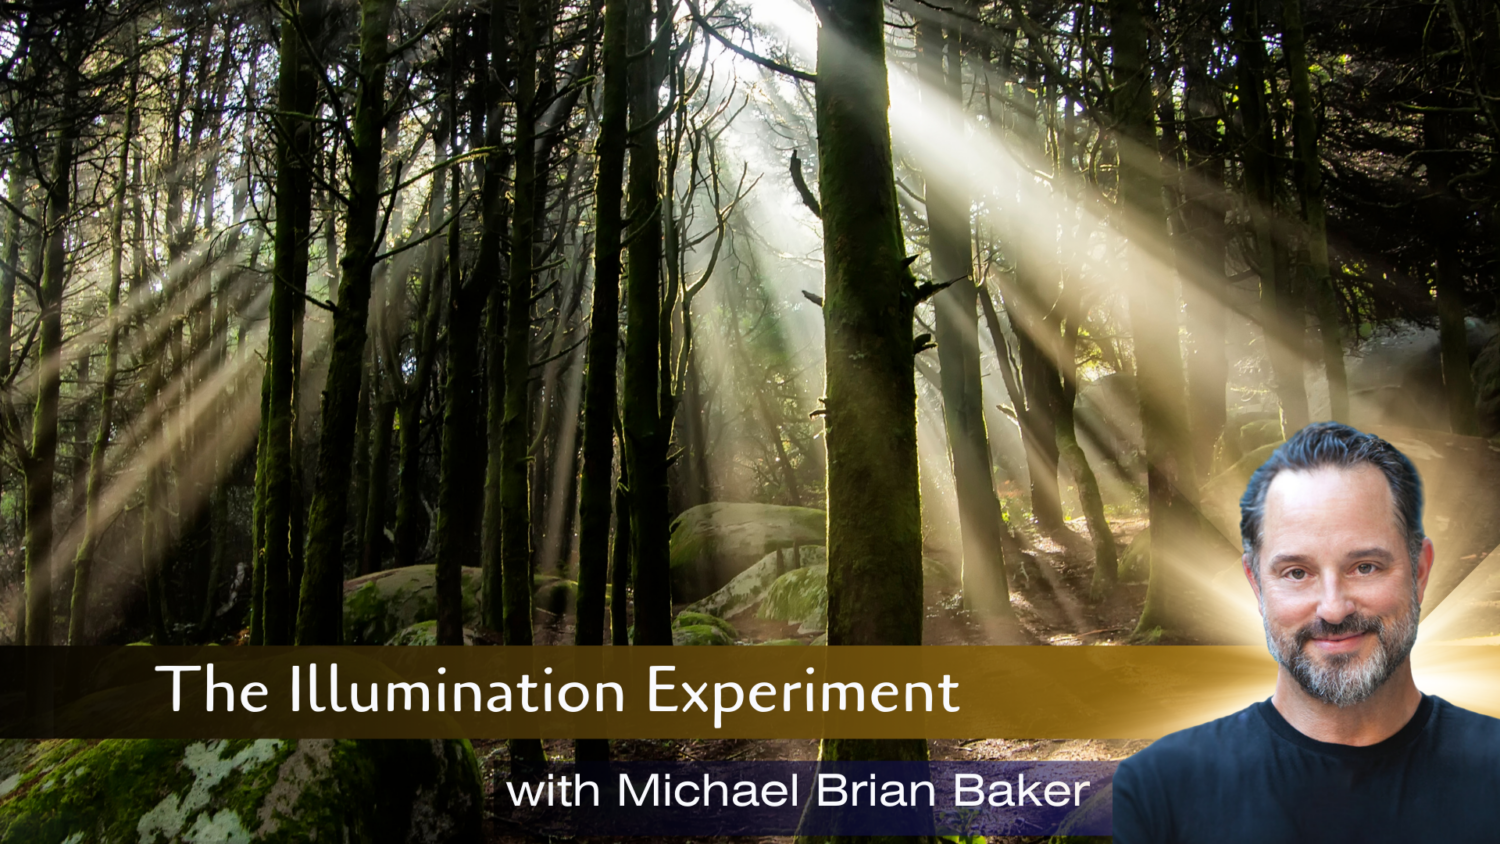 The Illumination Experiment with Michael Brian Baker